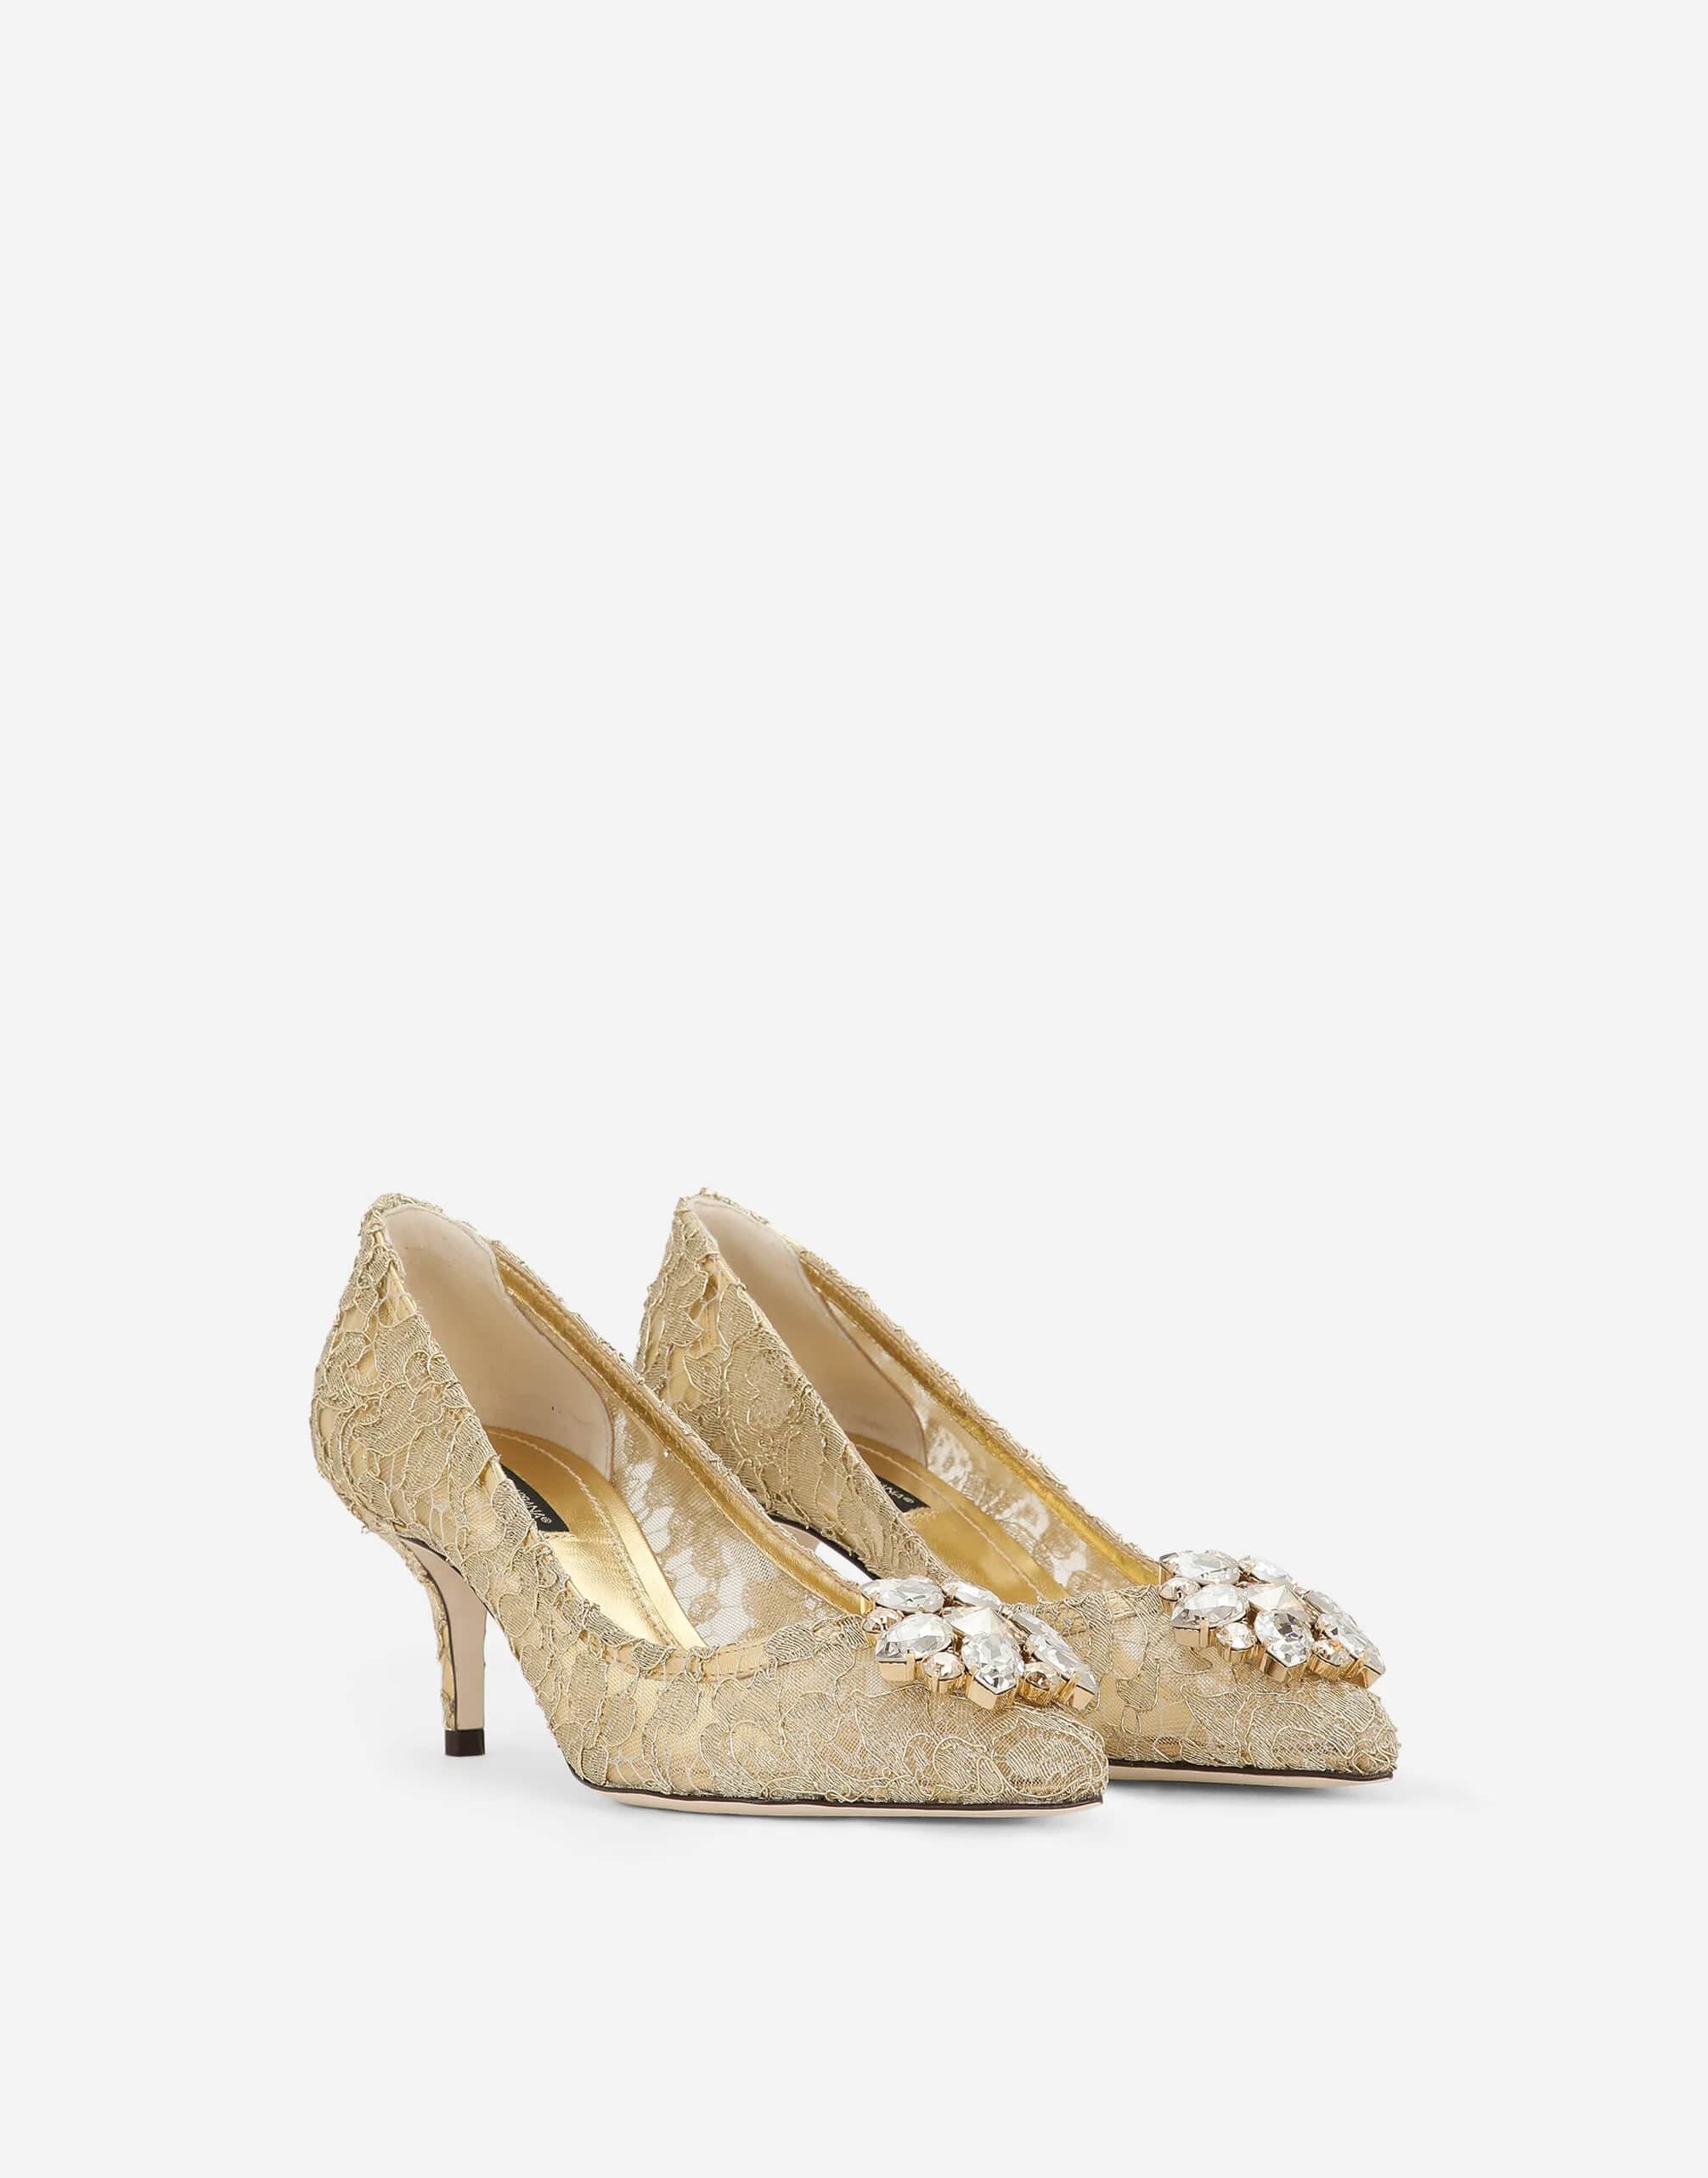 Dolce & Gabbana Lurex lace rainbow pumps with brooch detailing